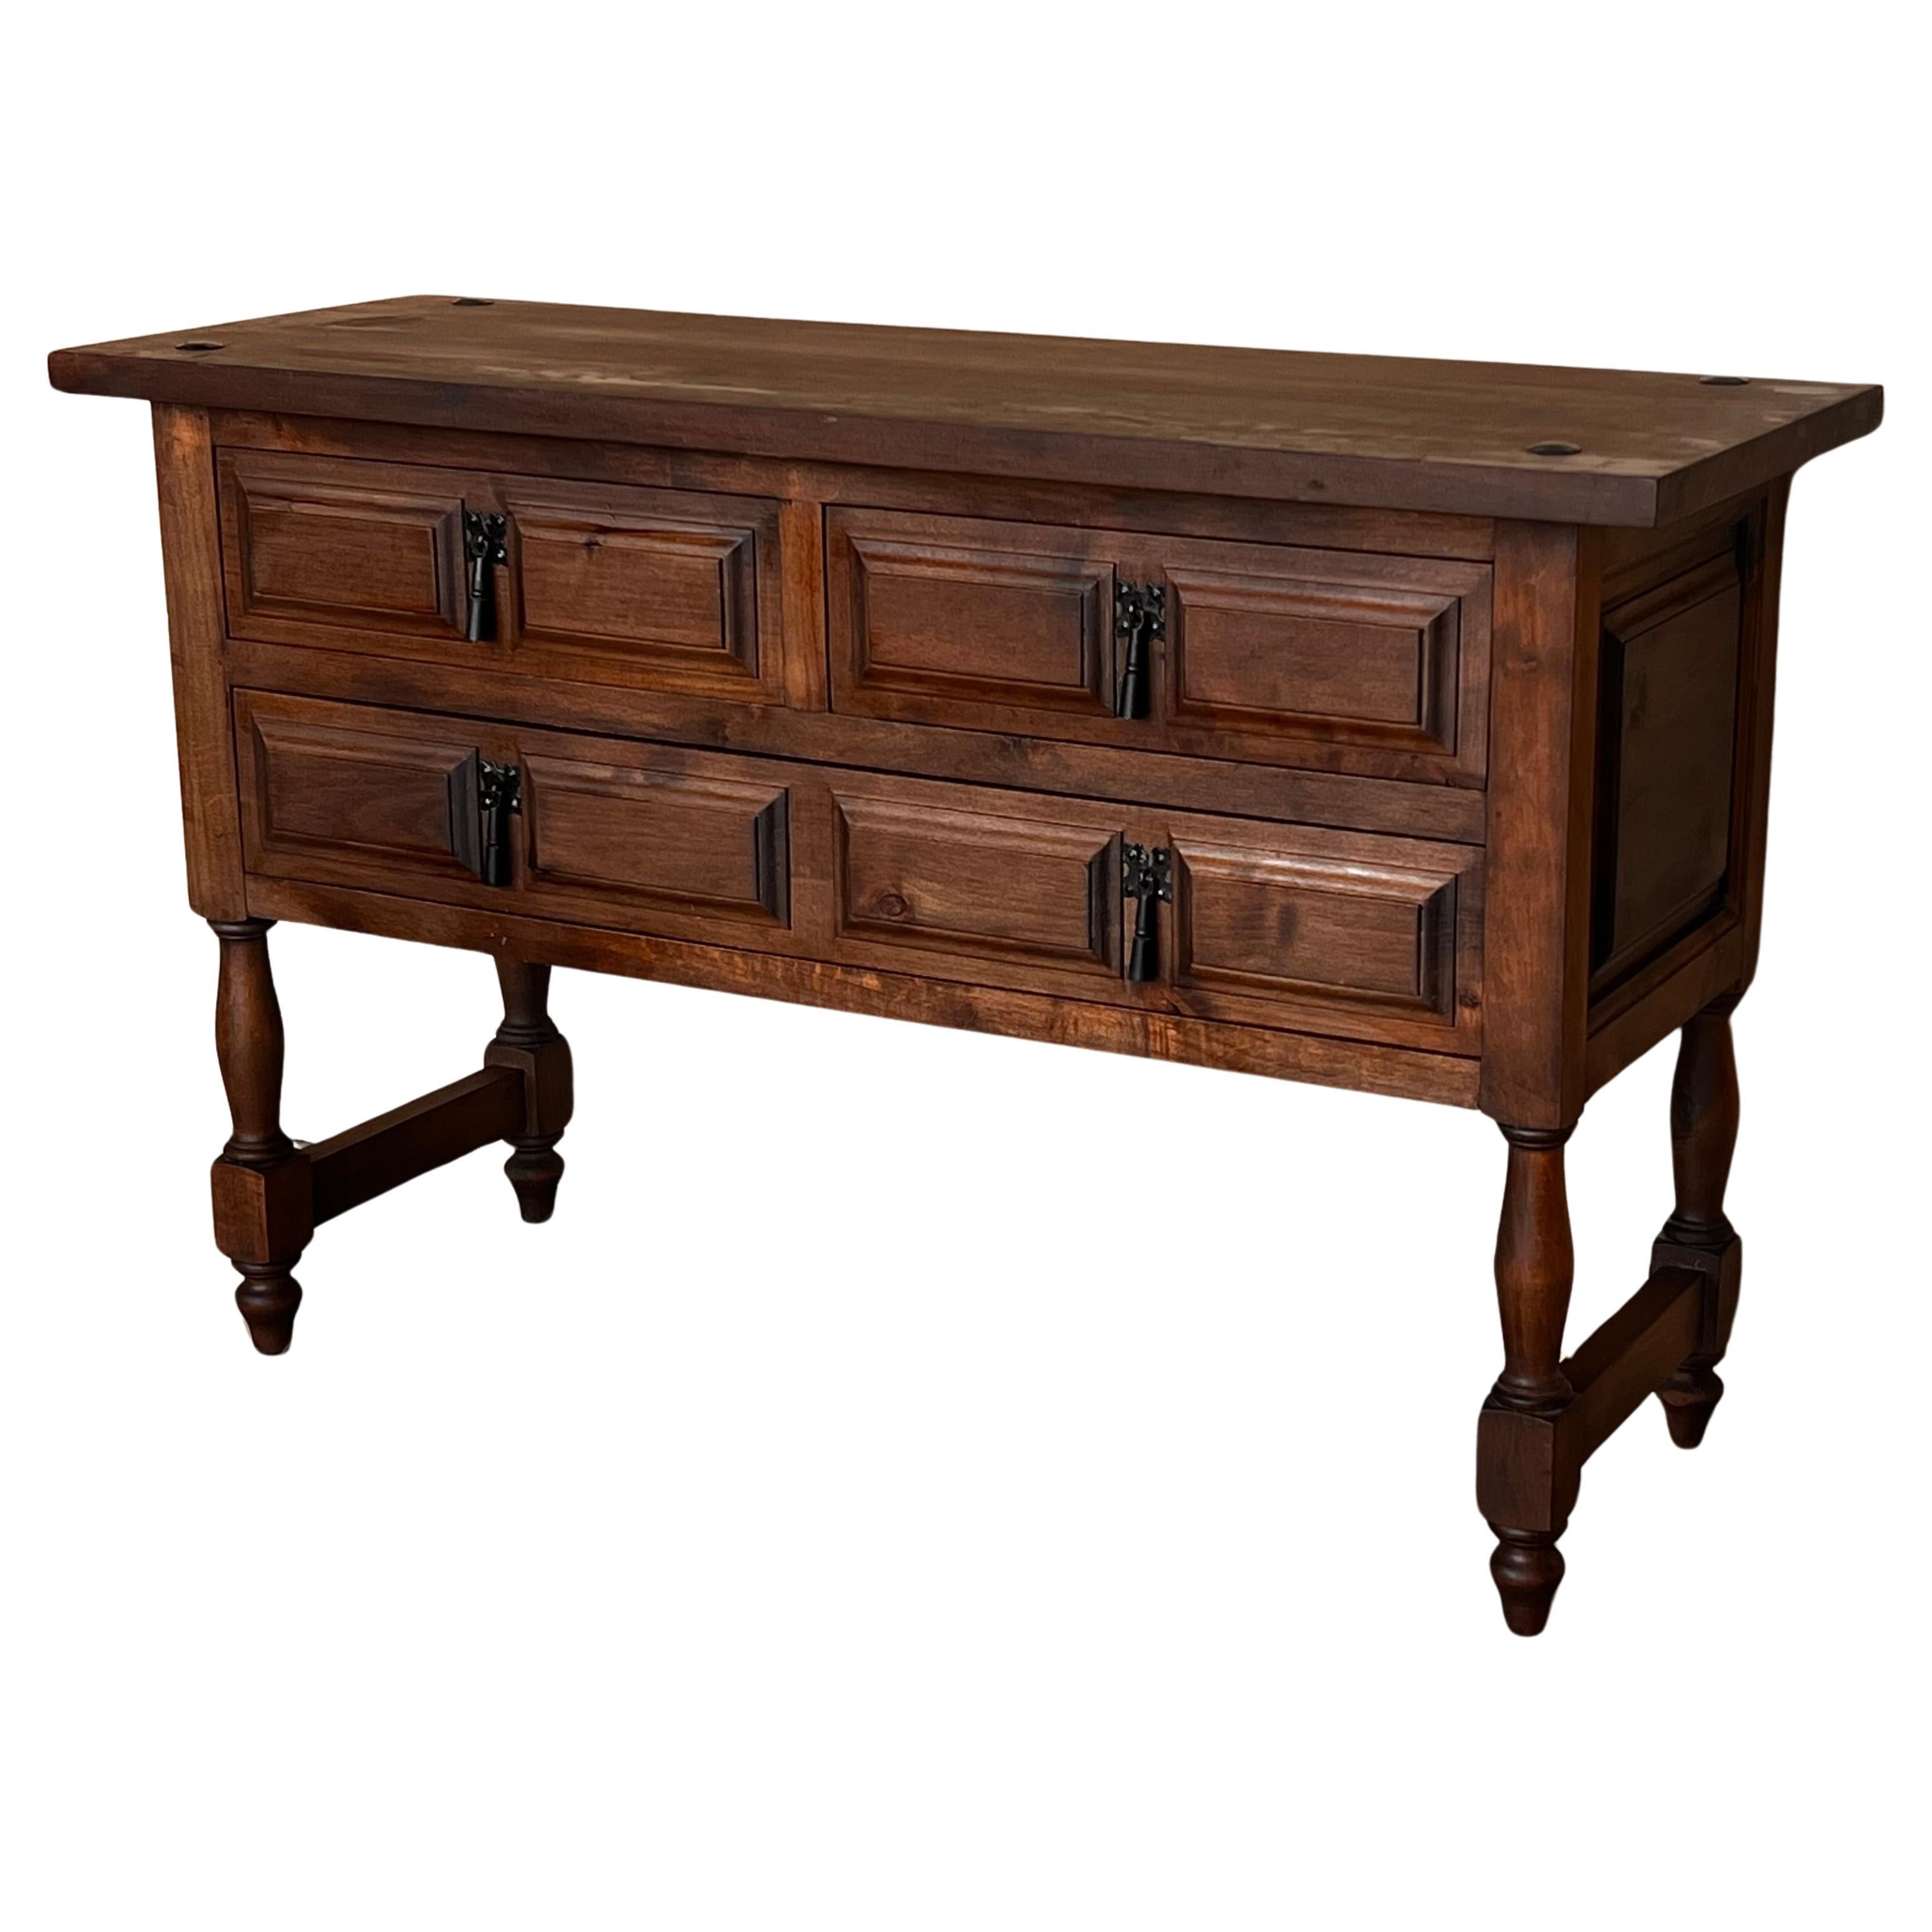 19th Century Catalan Spanish Carved Walnut Console Sofa Table, Four Drawers For Sale